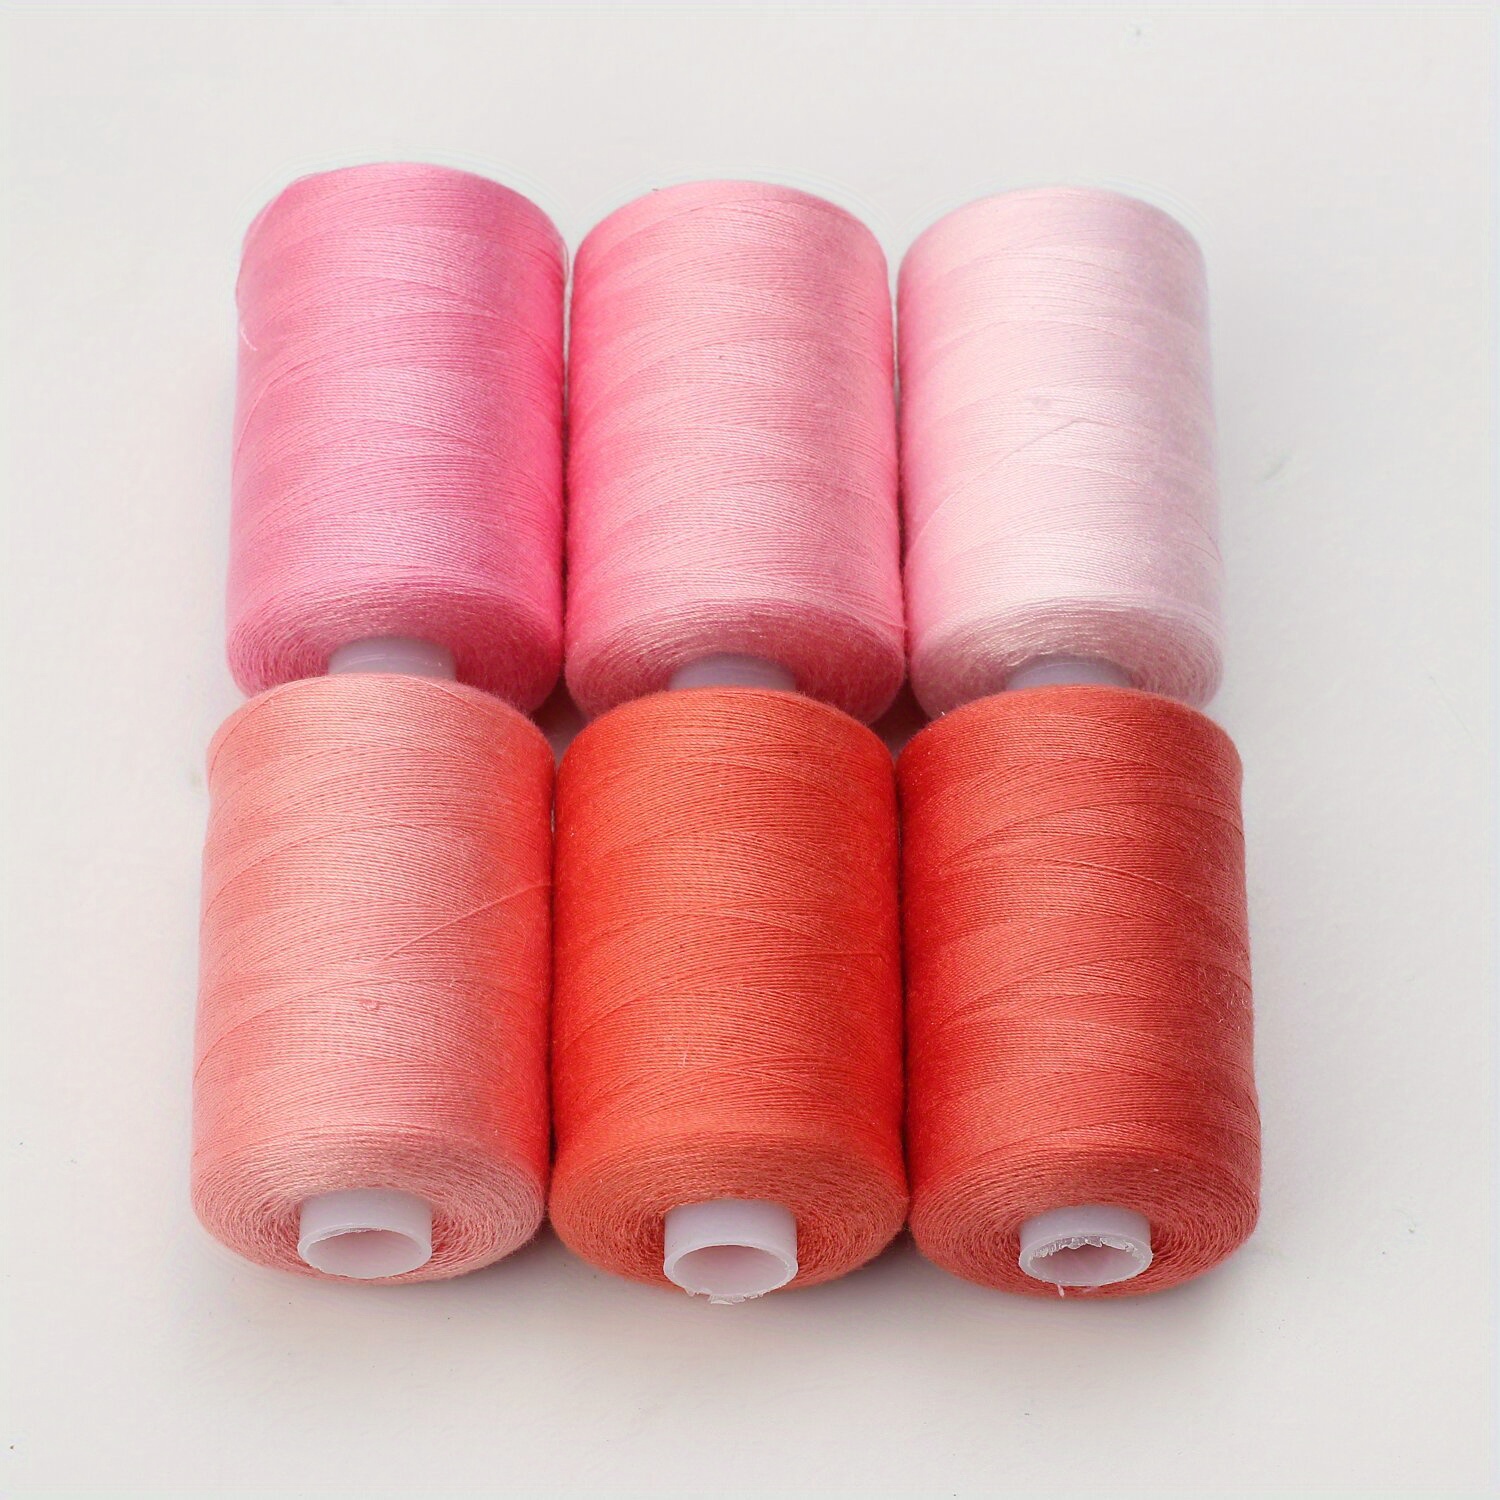 Sewing thread set Quilting